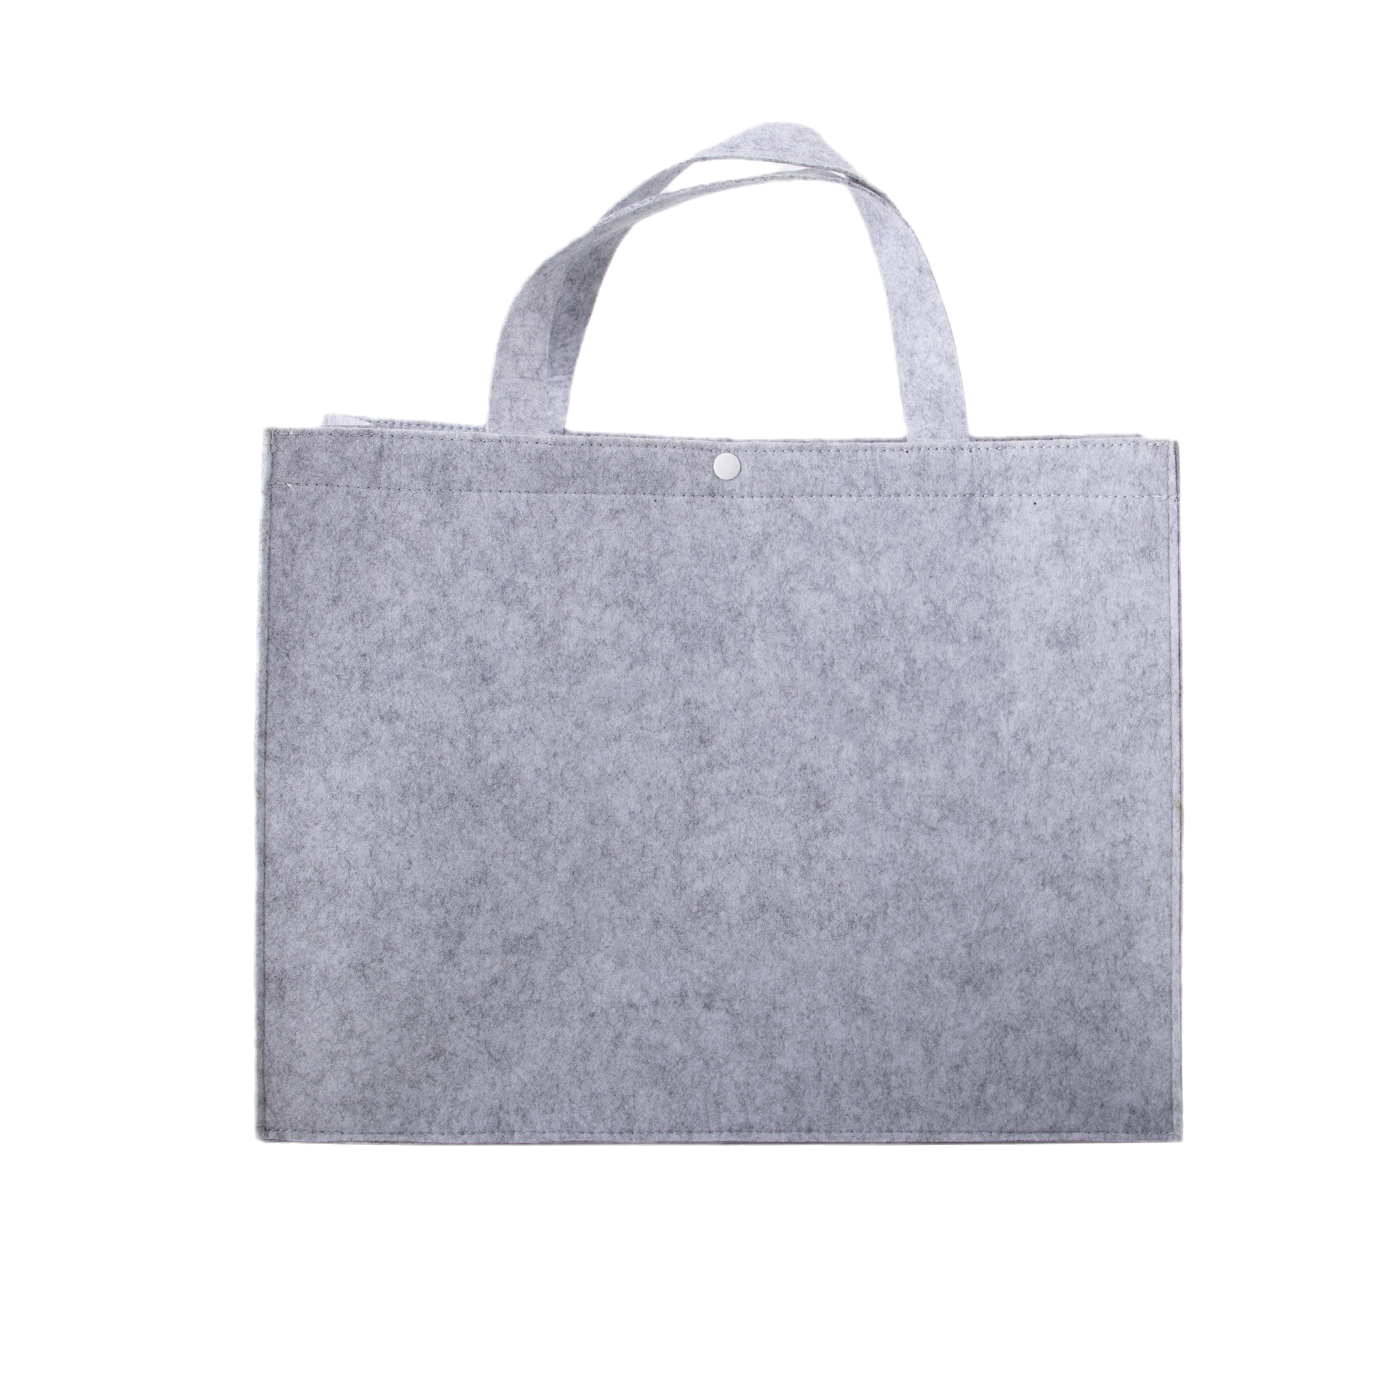 Big Felt Tote Bag With Button2